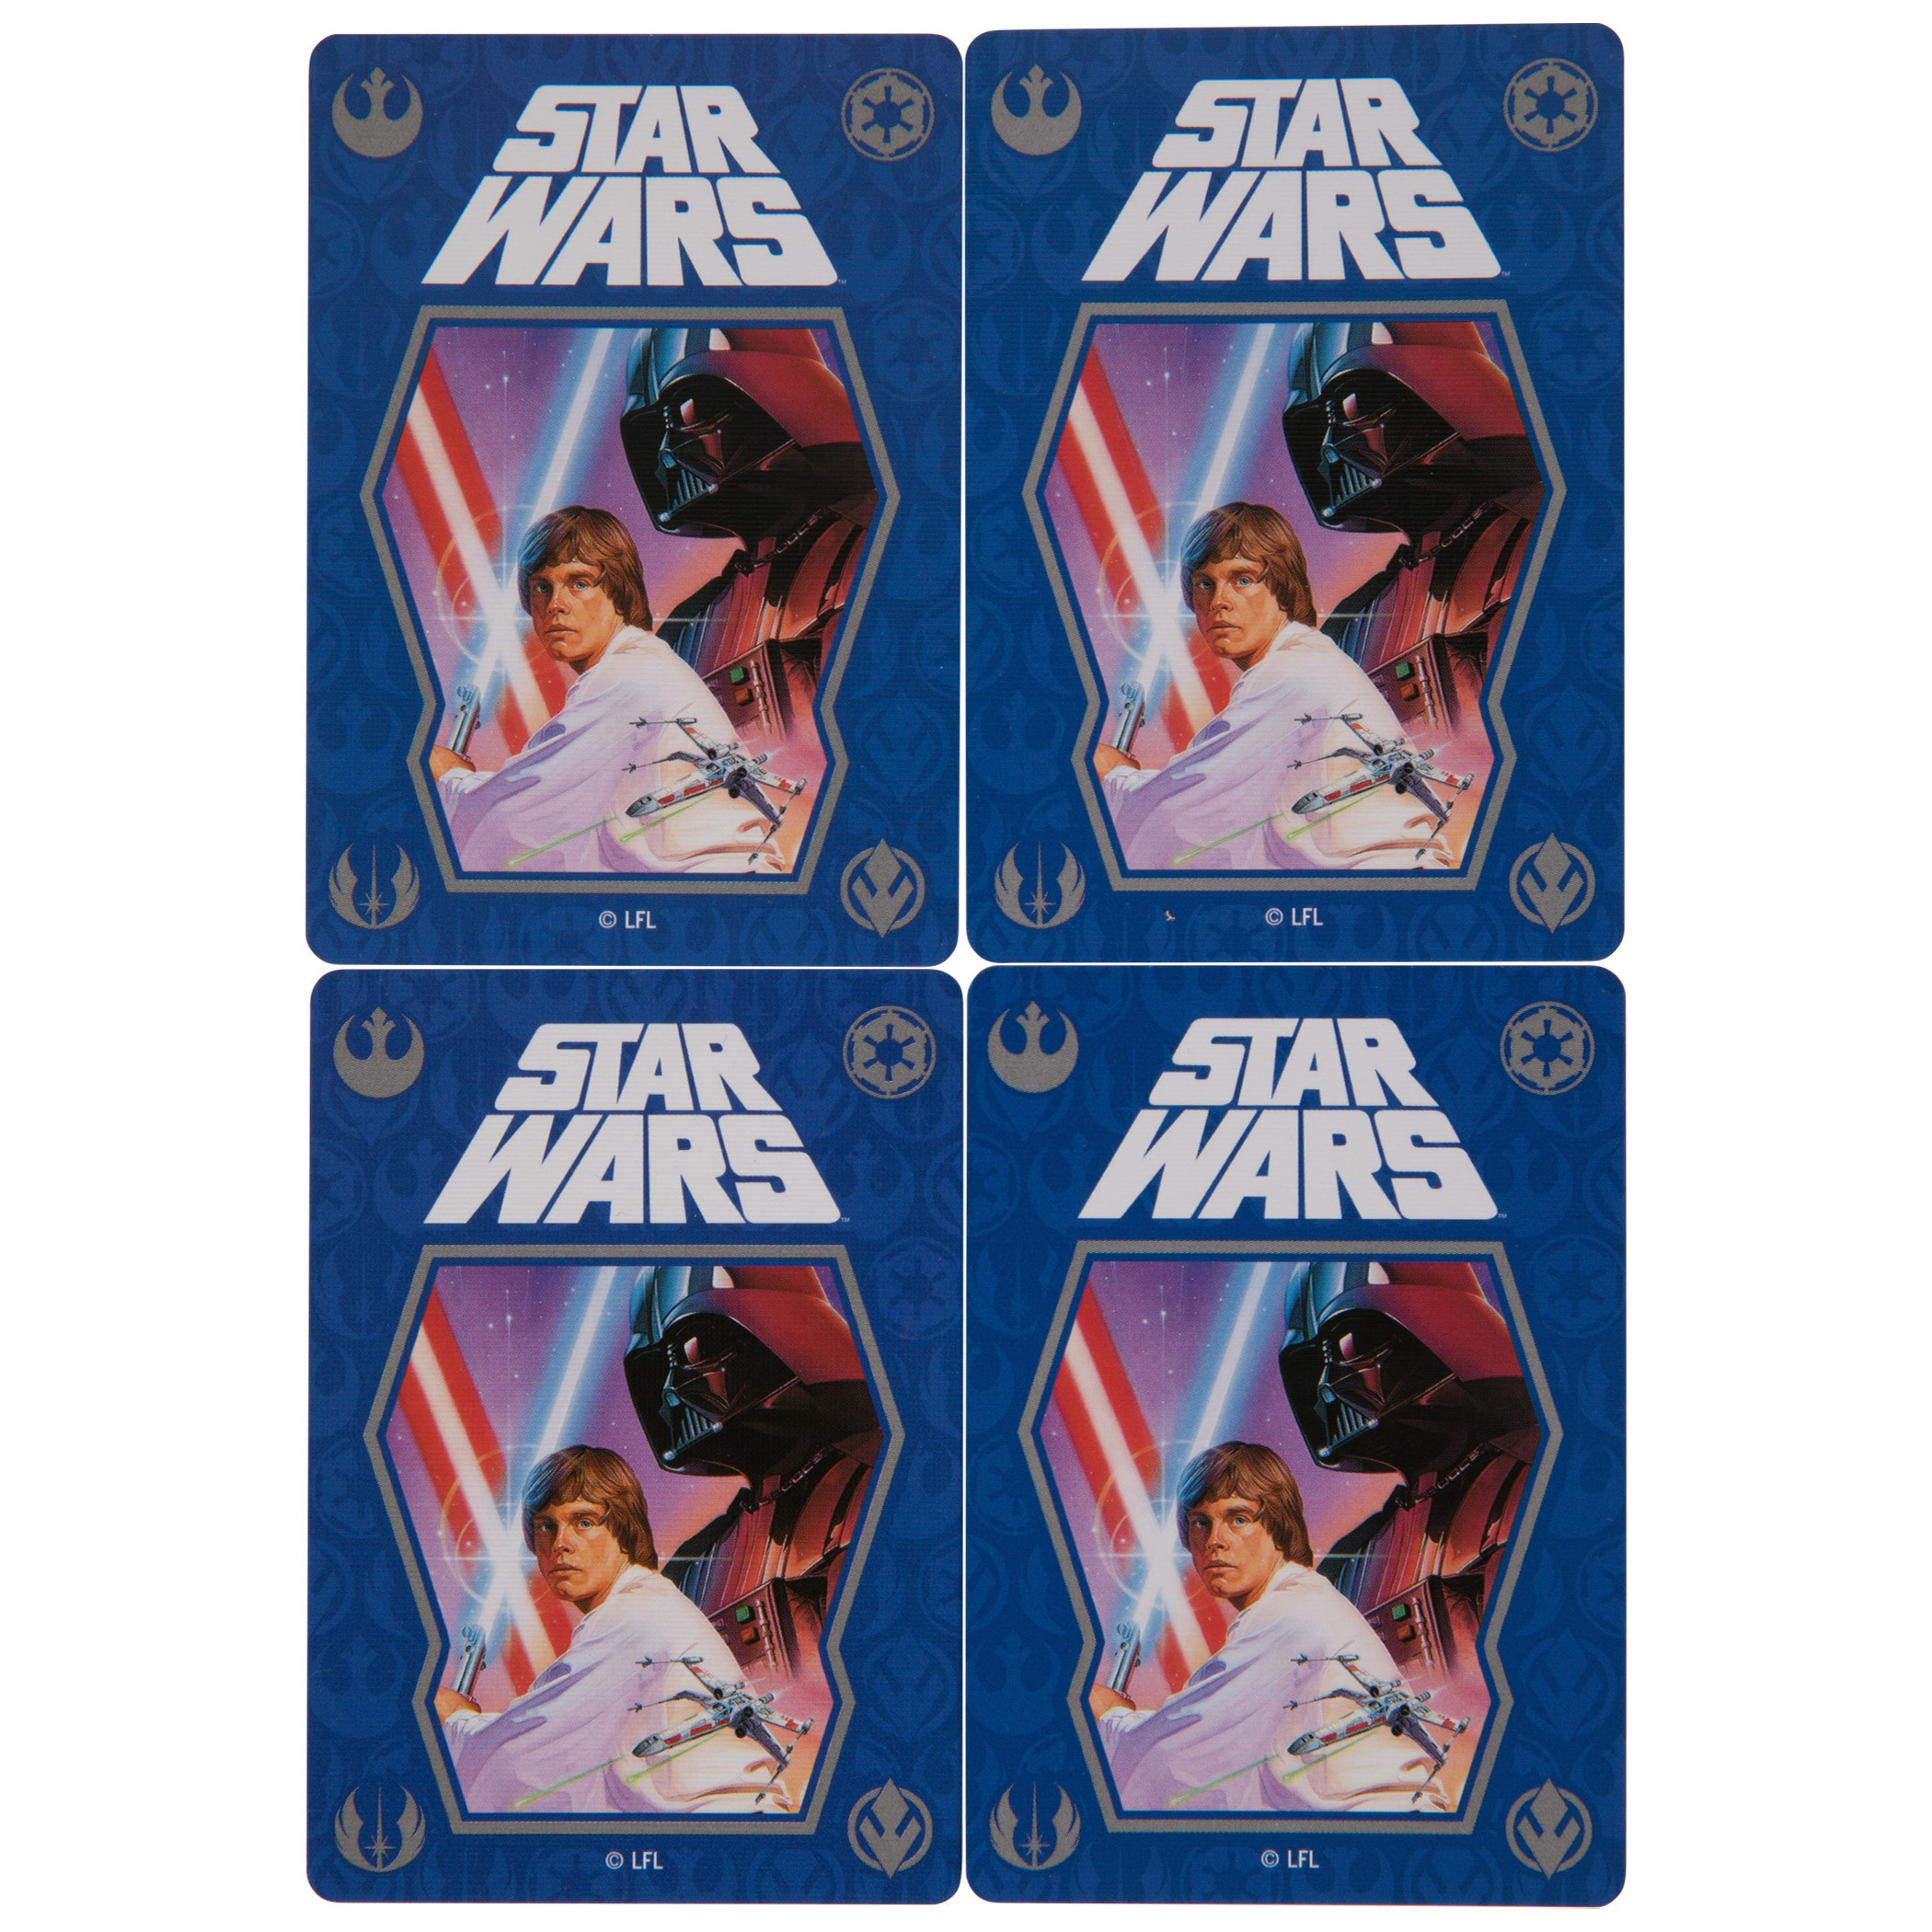 Star Wars Symbols Deck of Playing Cards